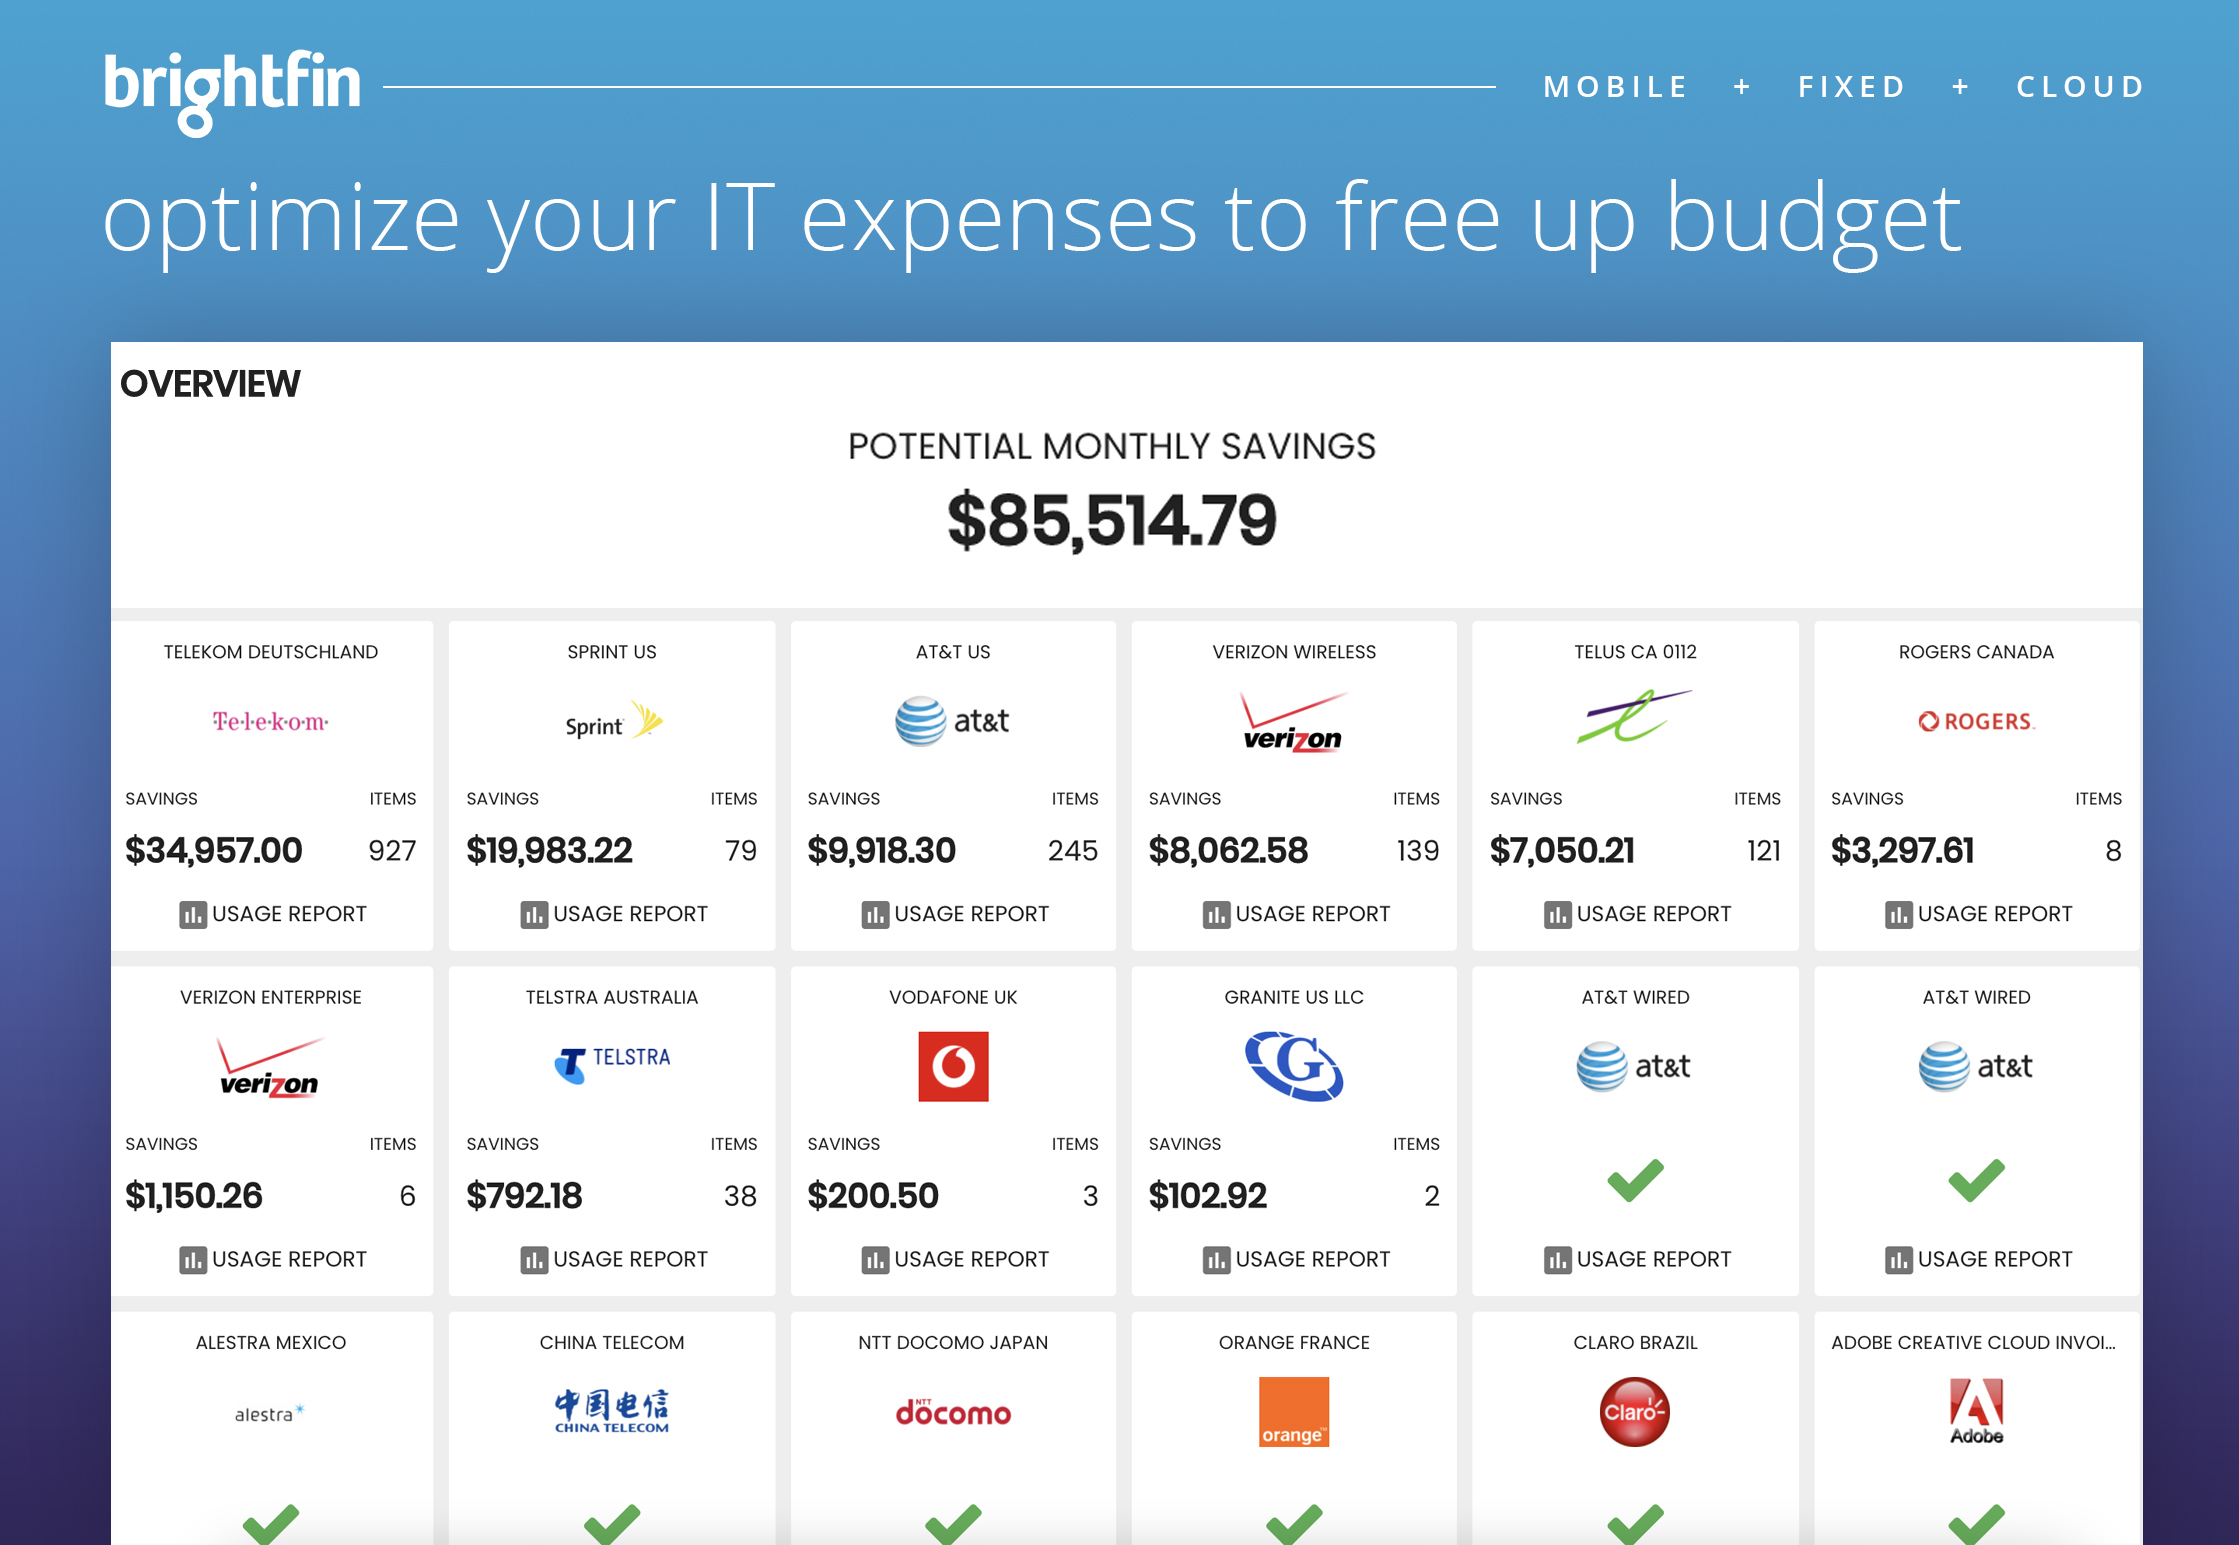 Optimize your IT expenses to free up budget